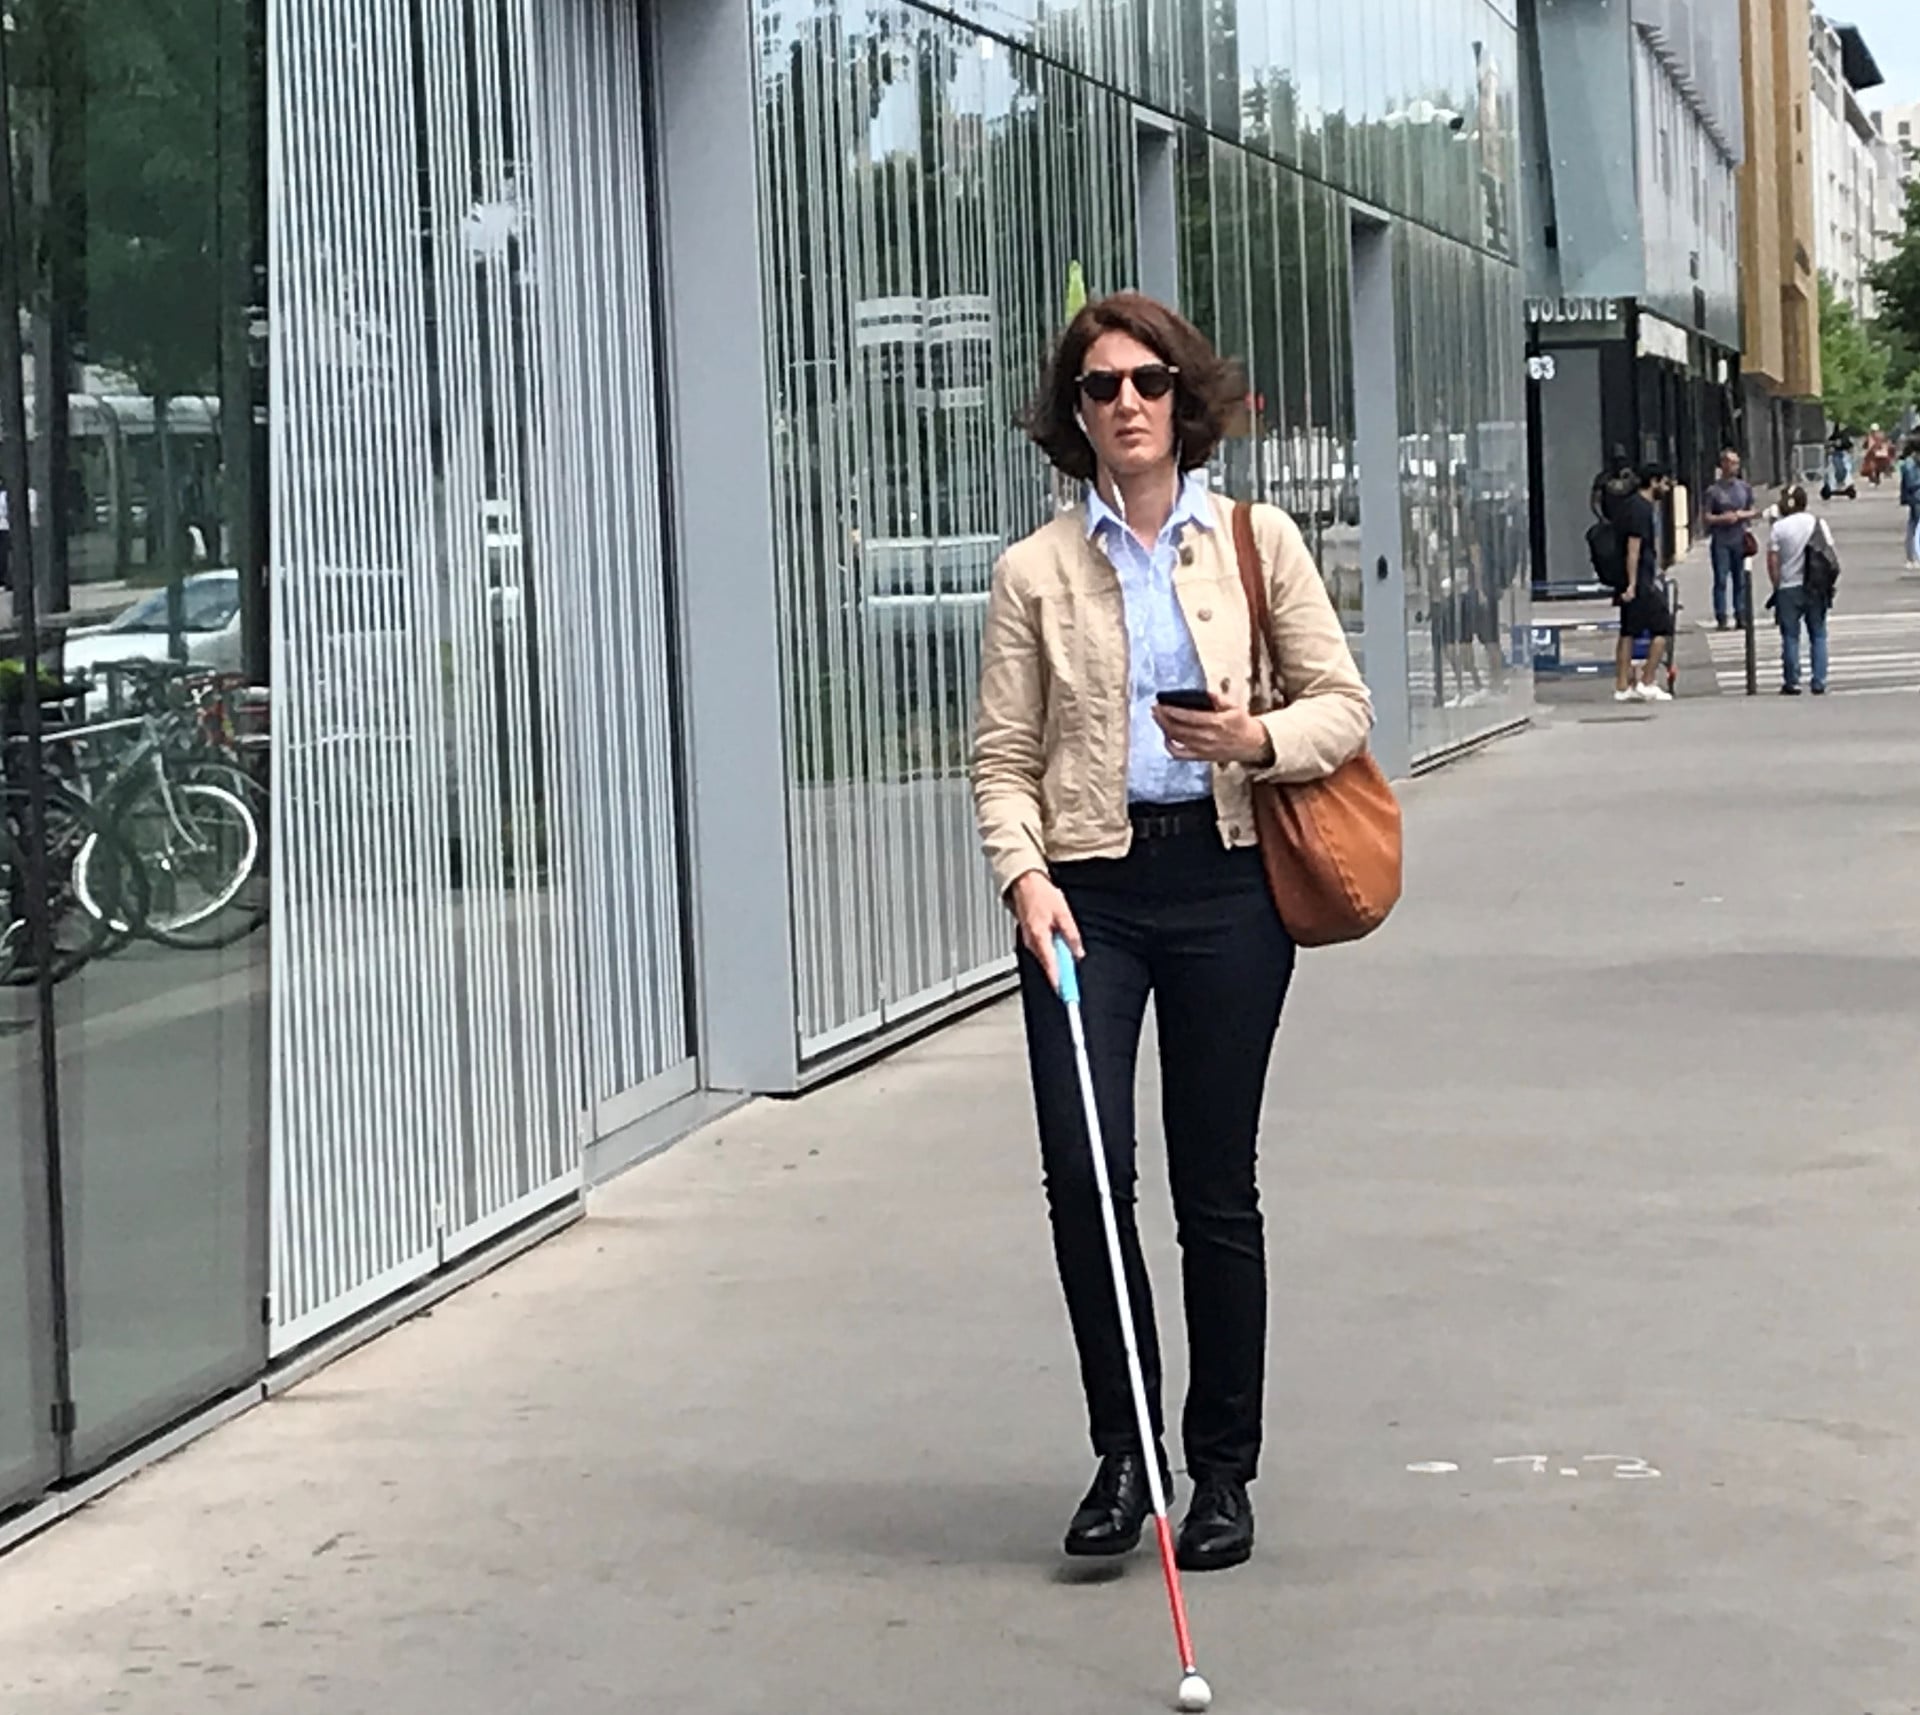 A blind woman uses Evelity, an assistive technology device, to find her bearings